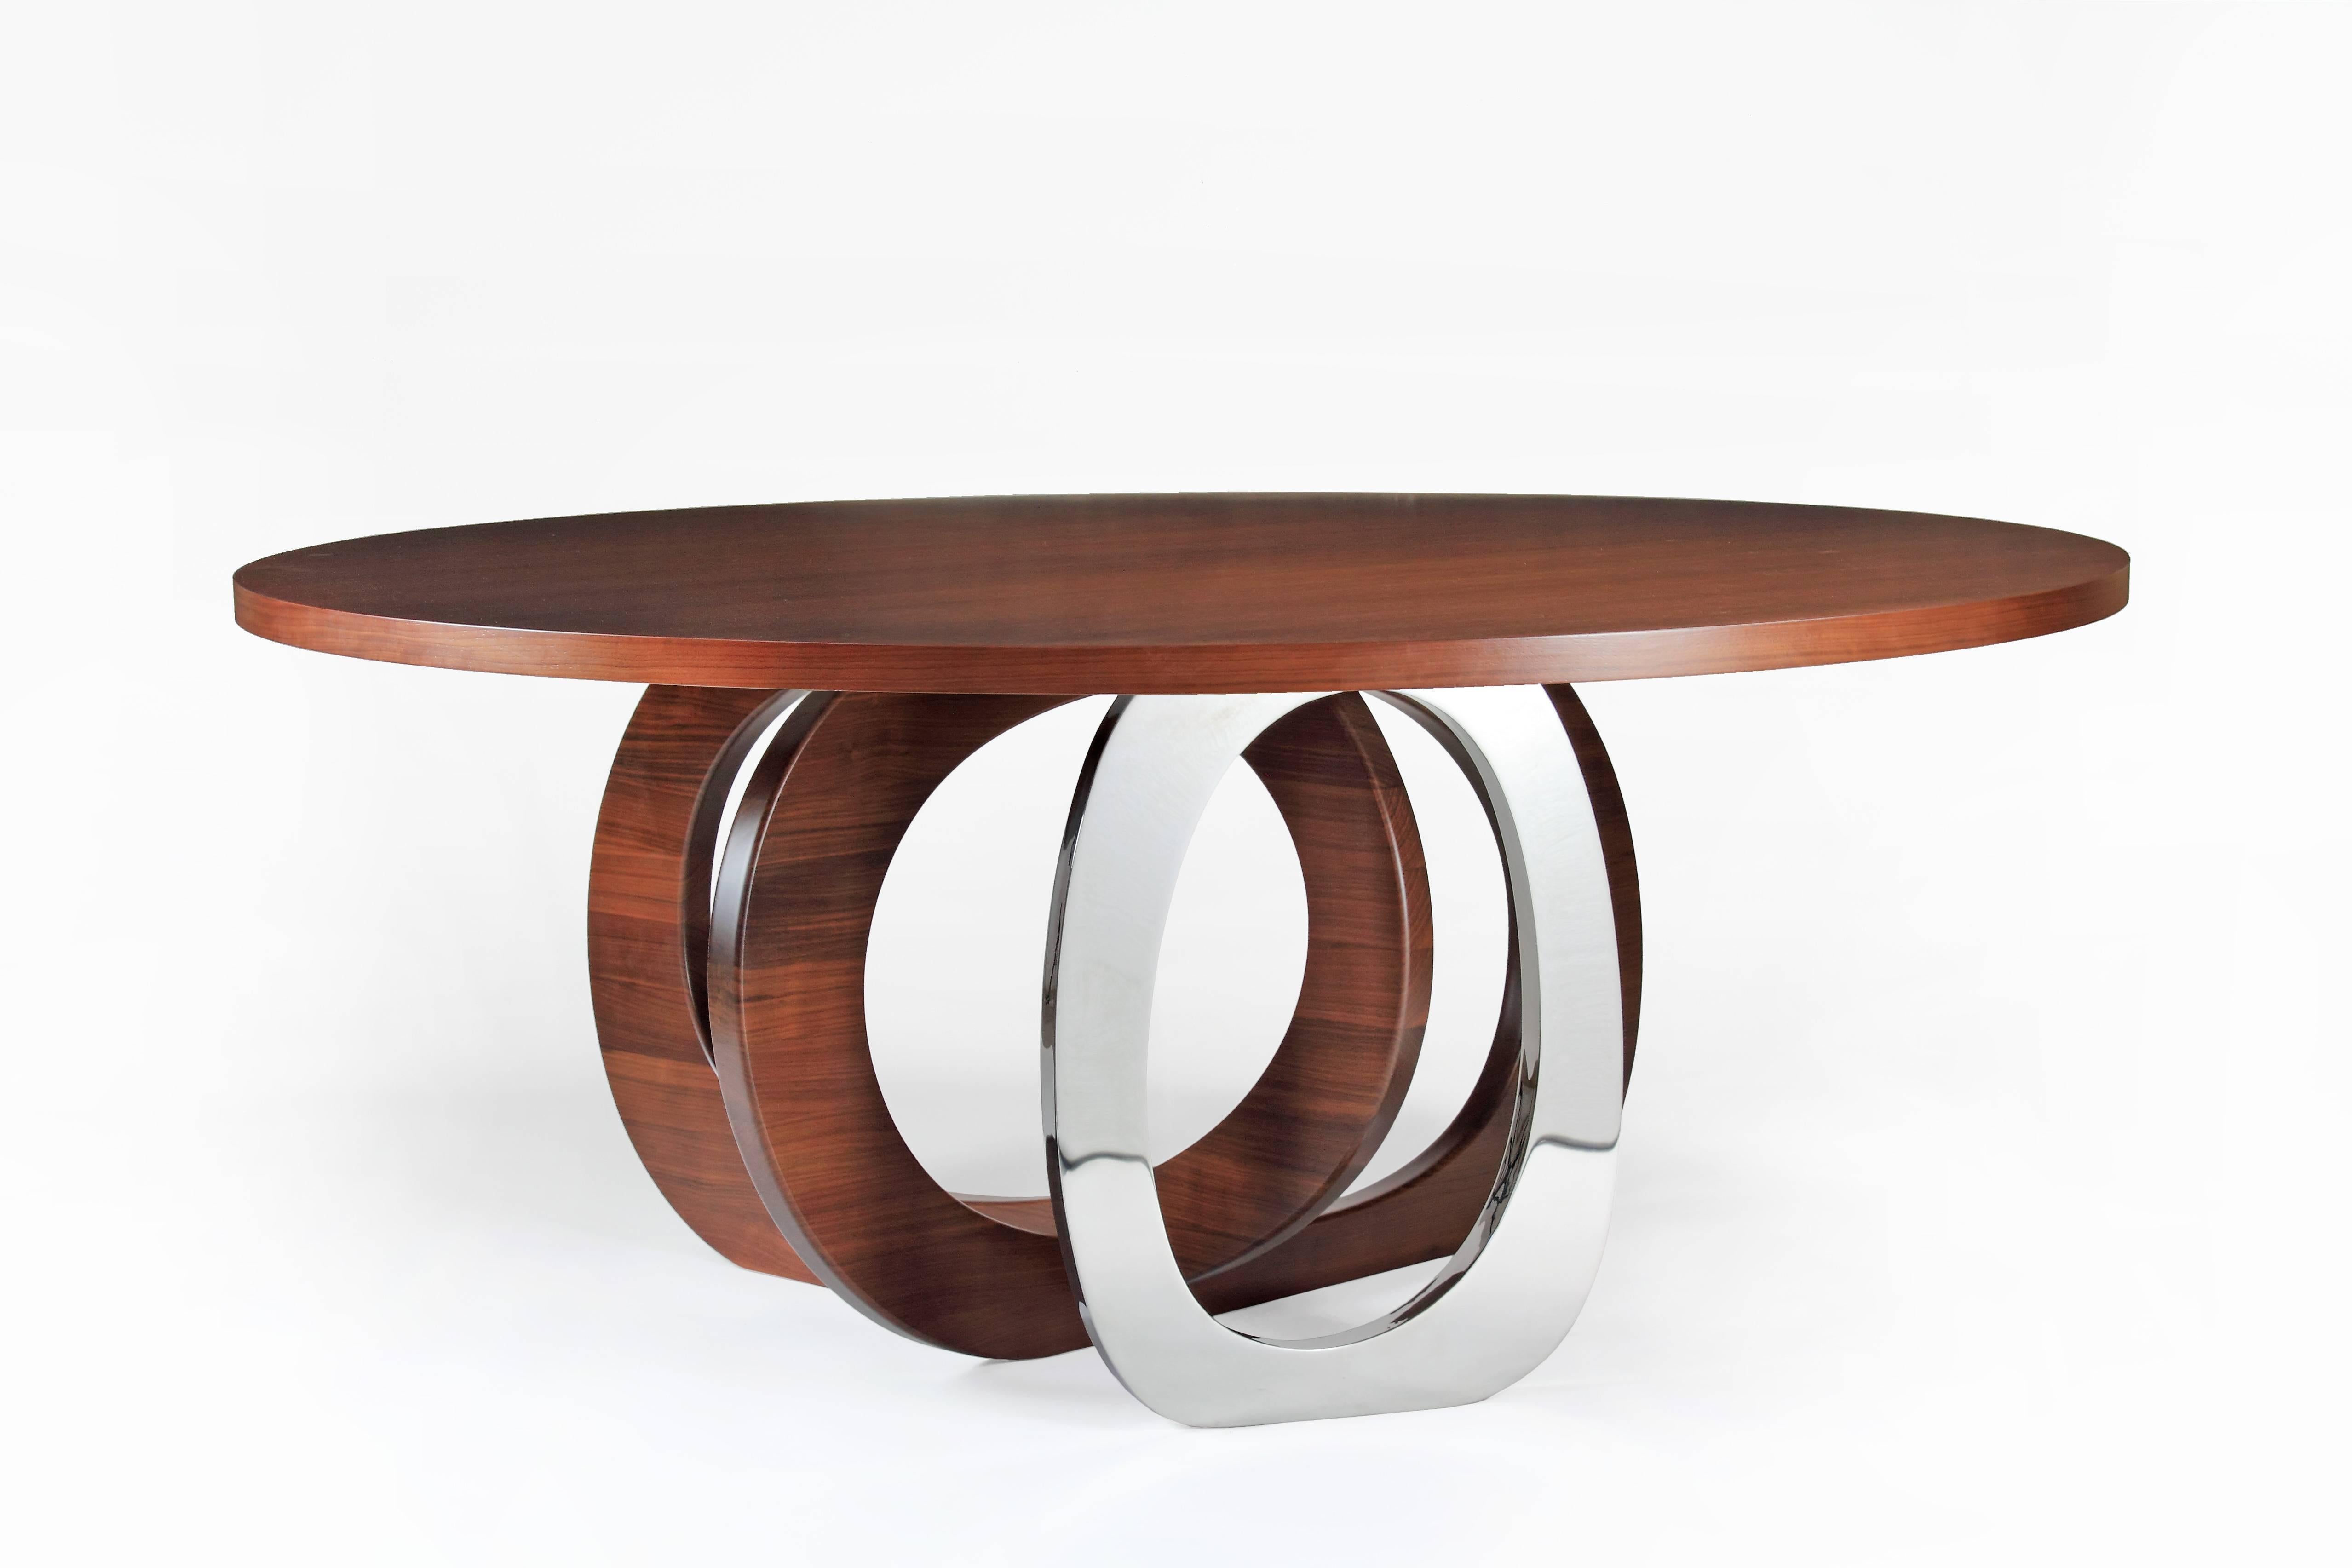 The 'Bangles Kelowna' table has a circular top, two rings in solid walnut wood and a single ring in mirror polished stainless steel. 

Dimensions: D 180 x H 75 cm. Dimensions are customizable.

Each table is hand signed and numbered by the artists